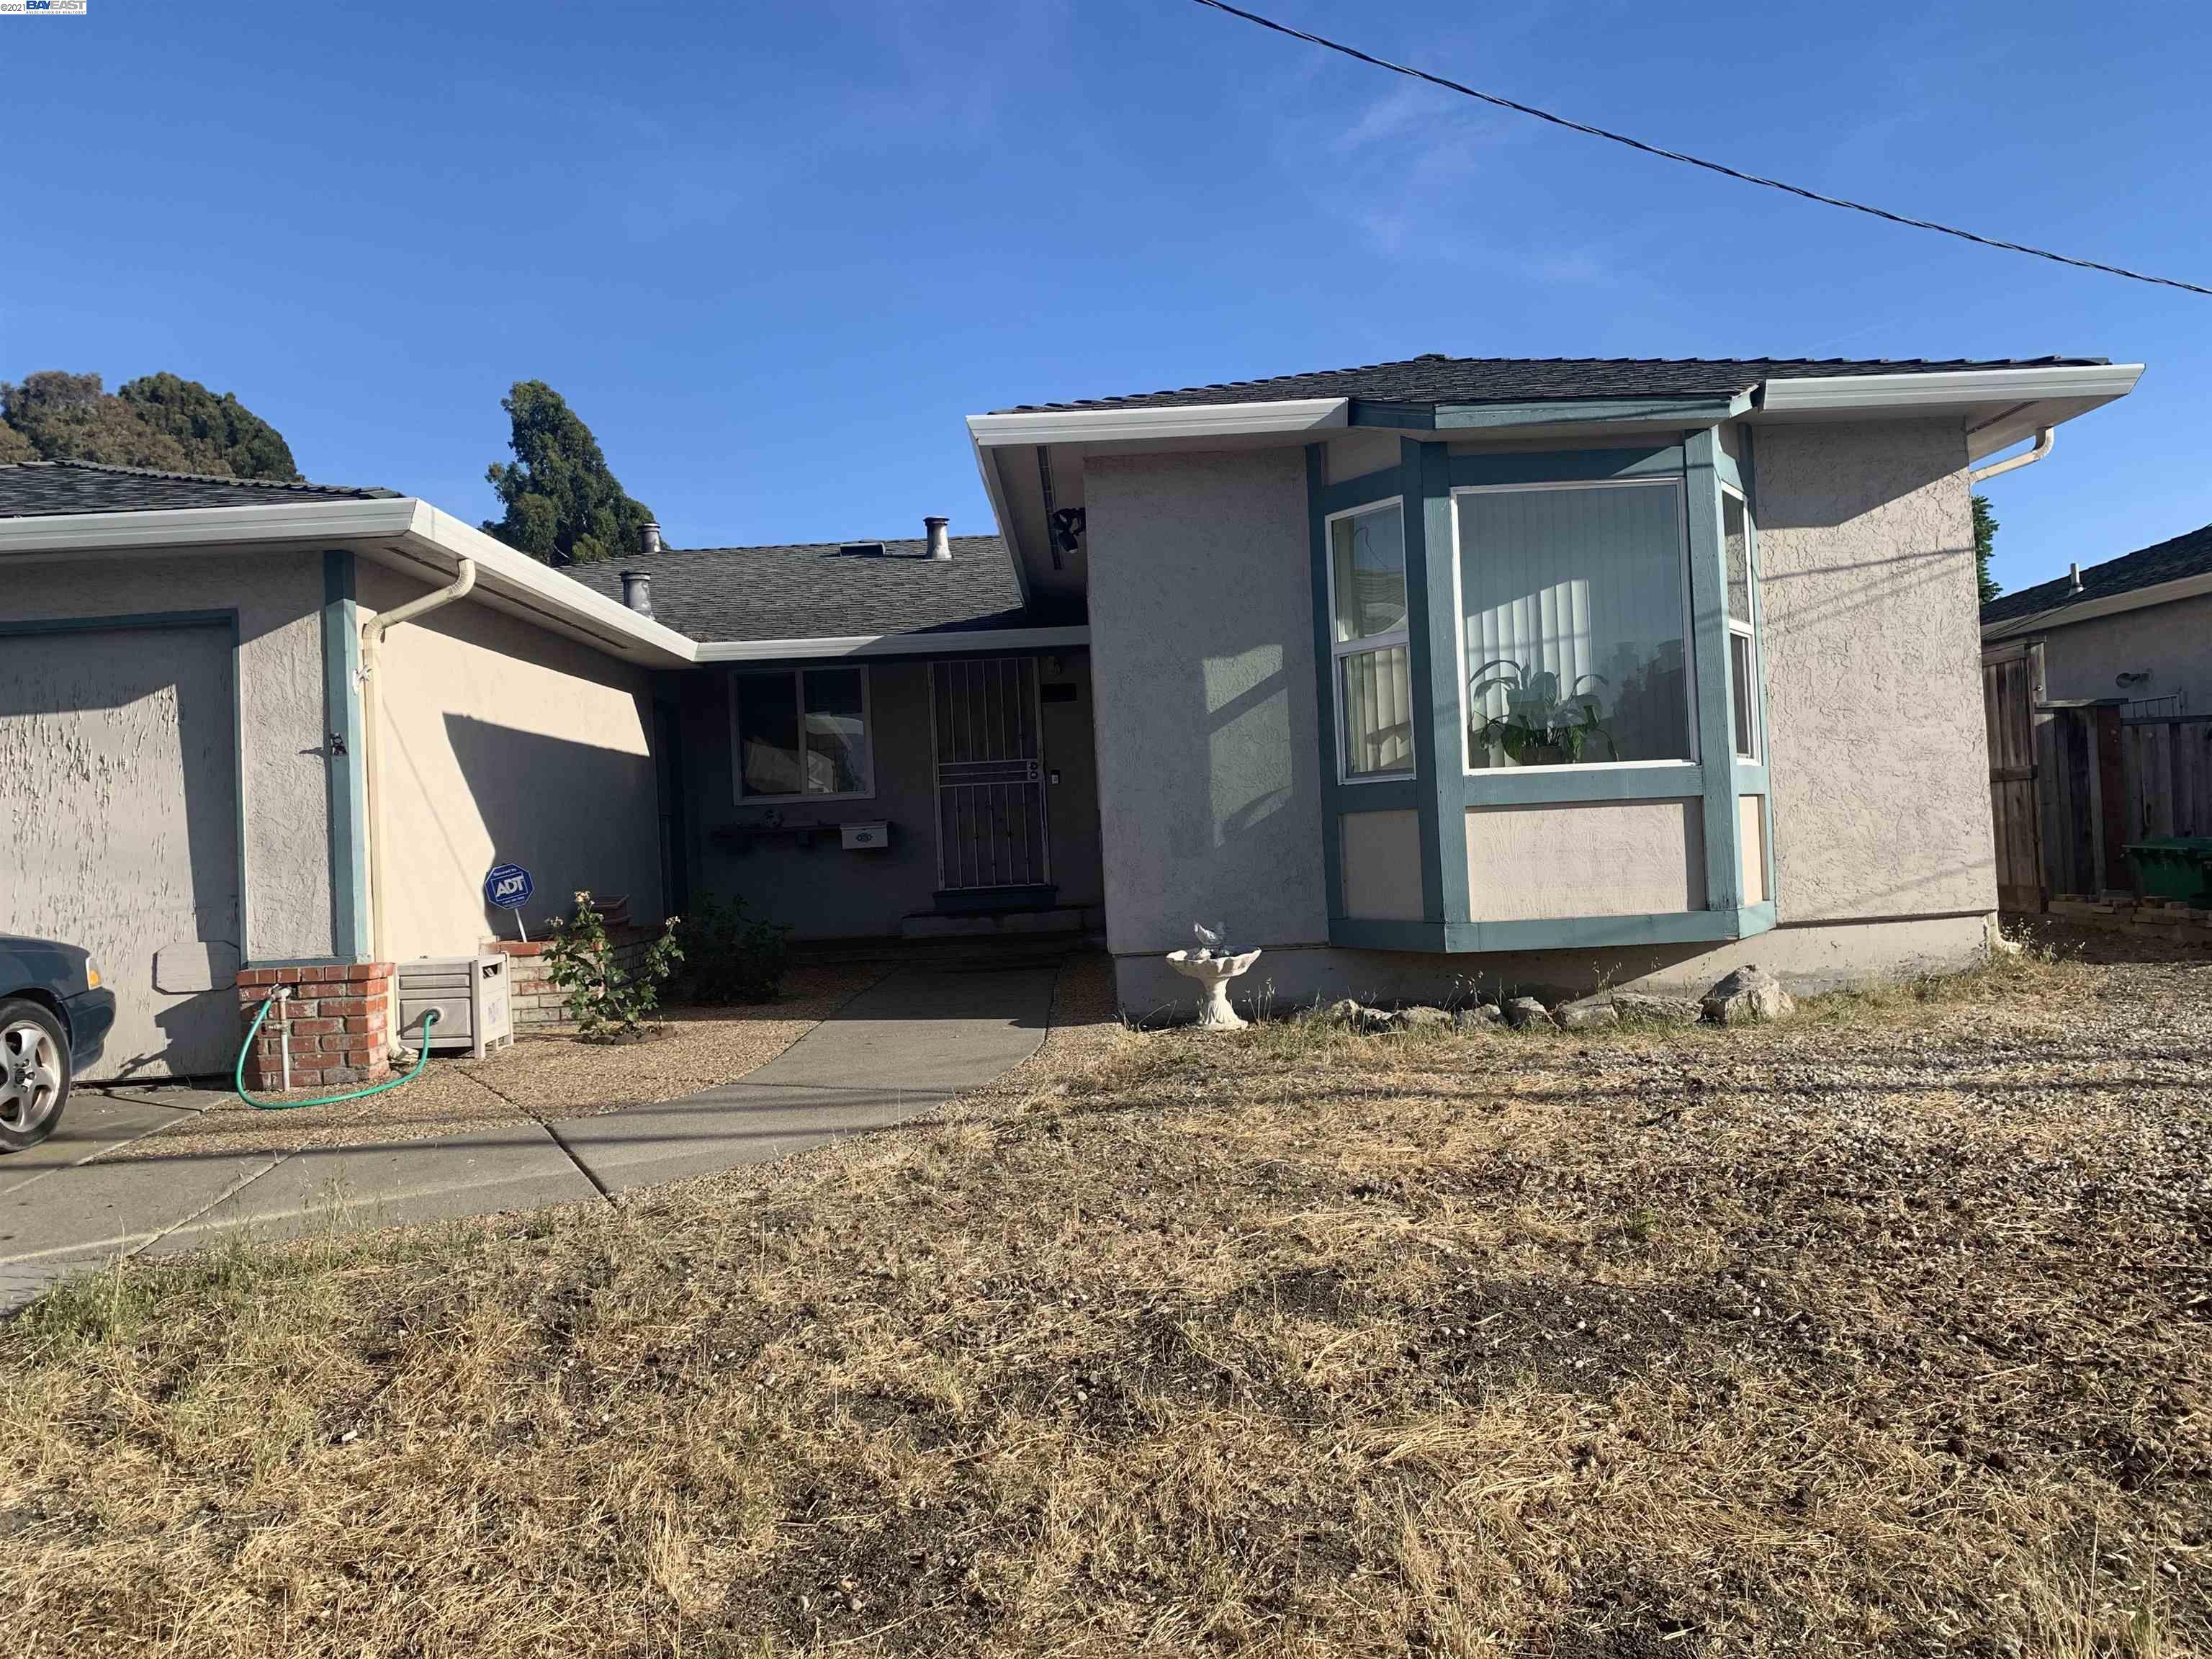 Expanded Great room and master bedroom! Lovely eat in kitchen with fire place. Some of the updated amenities are dual pane windows and composition roof. Centrally located close to  Bridges, 580, 880. . Minutes to refineries, shopping. This is a must see!